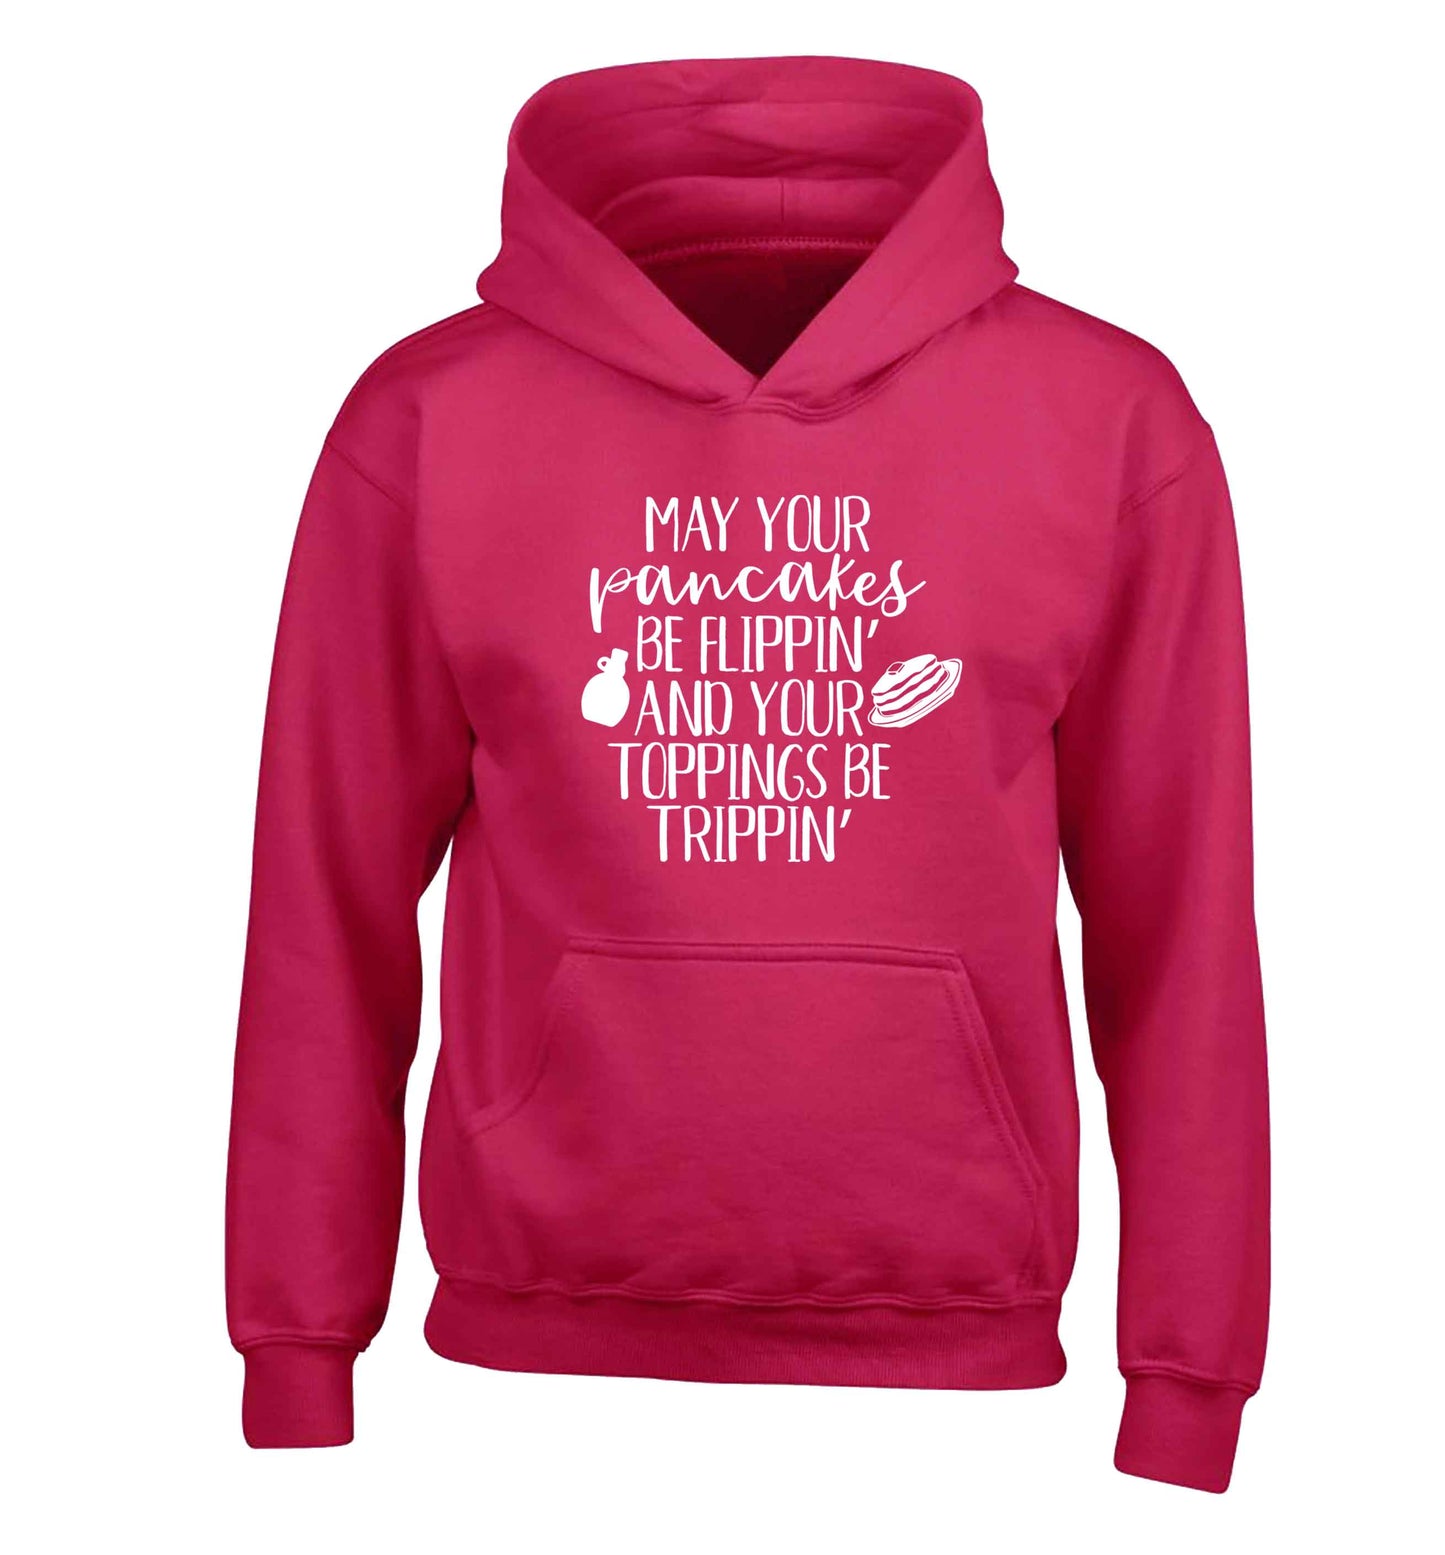 May your pancakes be flippin' and your toppings be trippin' children's pink hoodie 12-13 Years